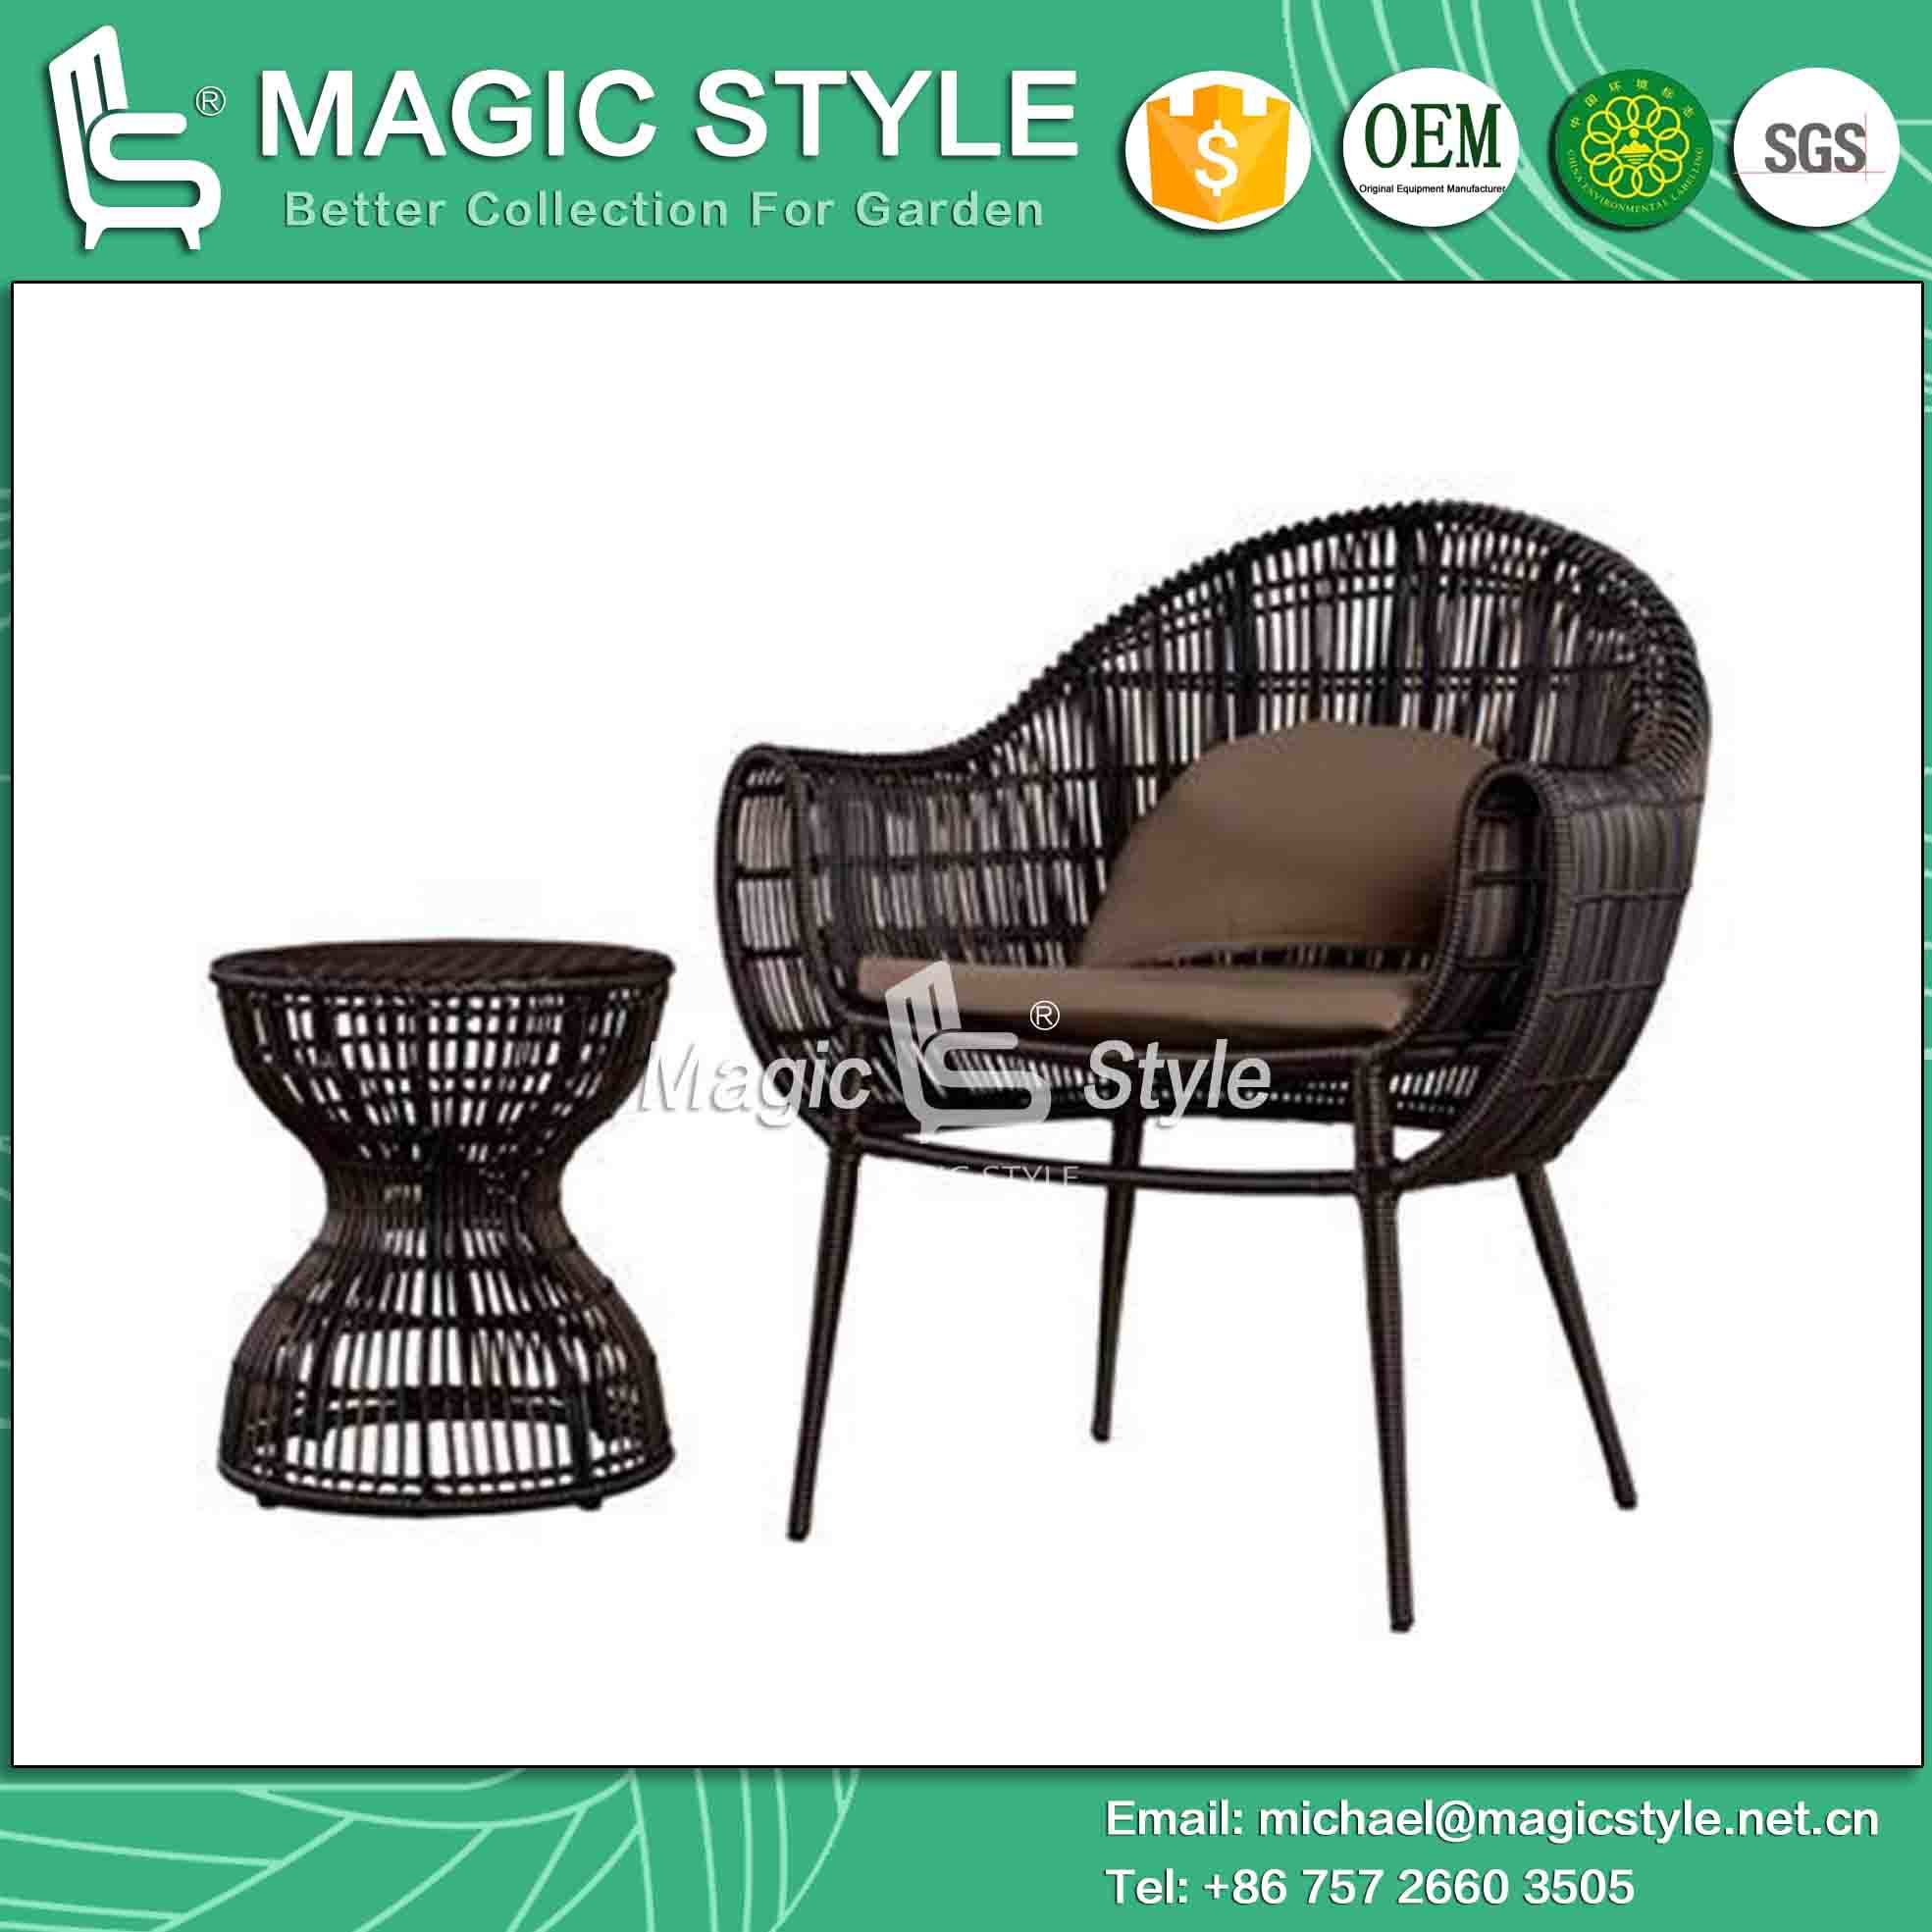 New Design Rattan Wicker Chair Leisure Chair Outdoor Furniture Patio Chair Balcony Chair Coffee Set Classical Furniture (Magic Style)